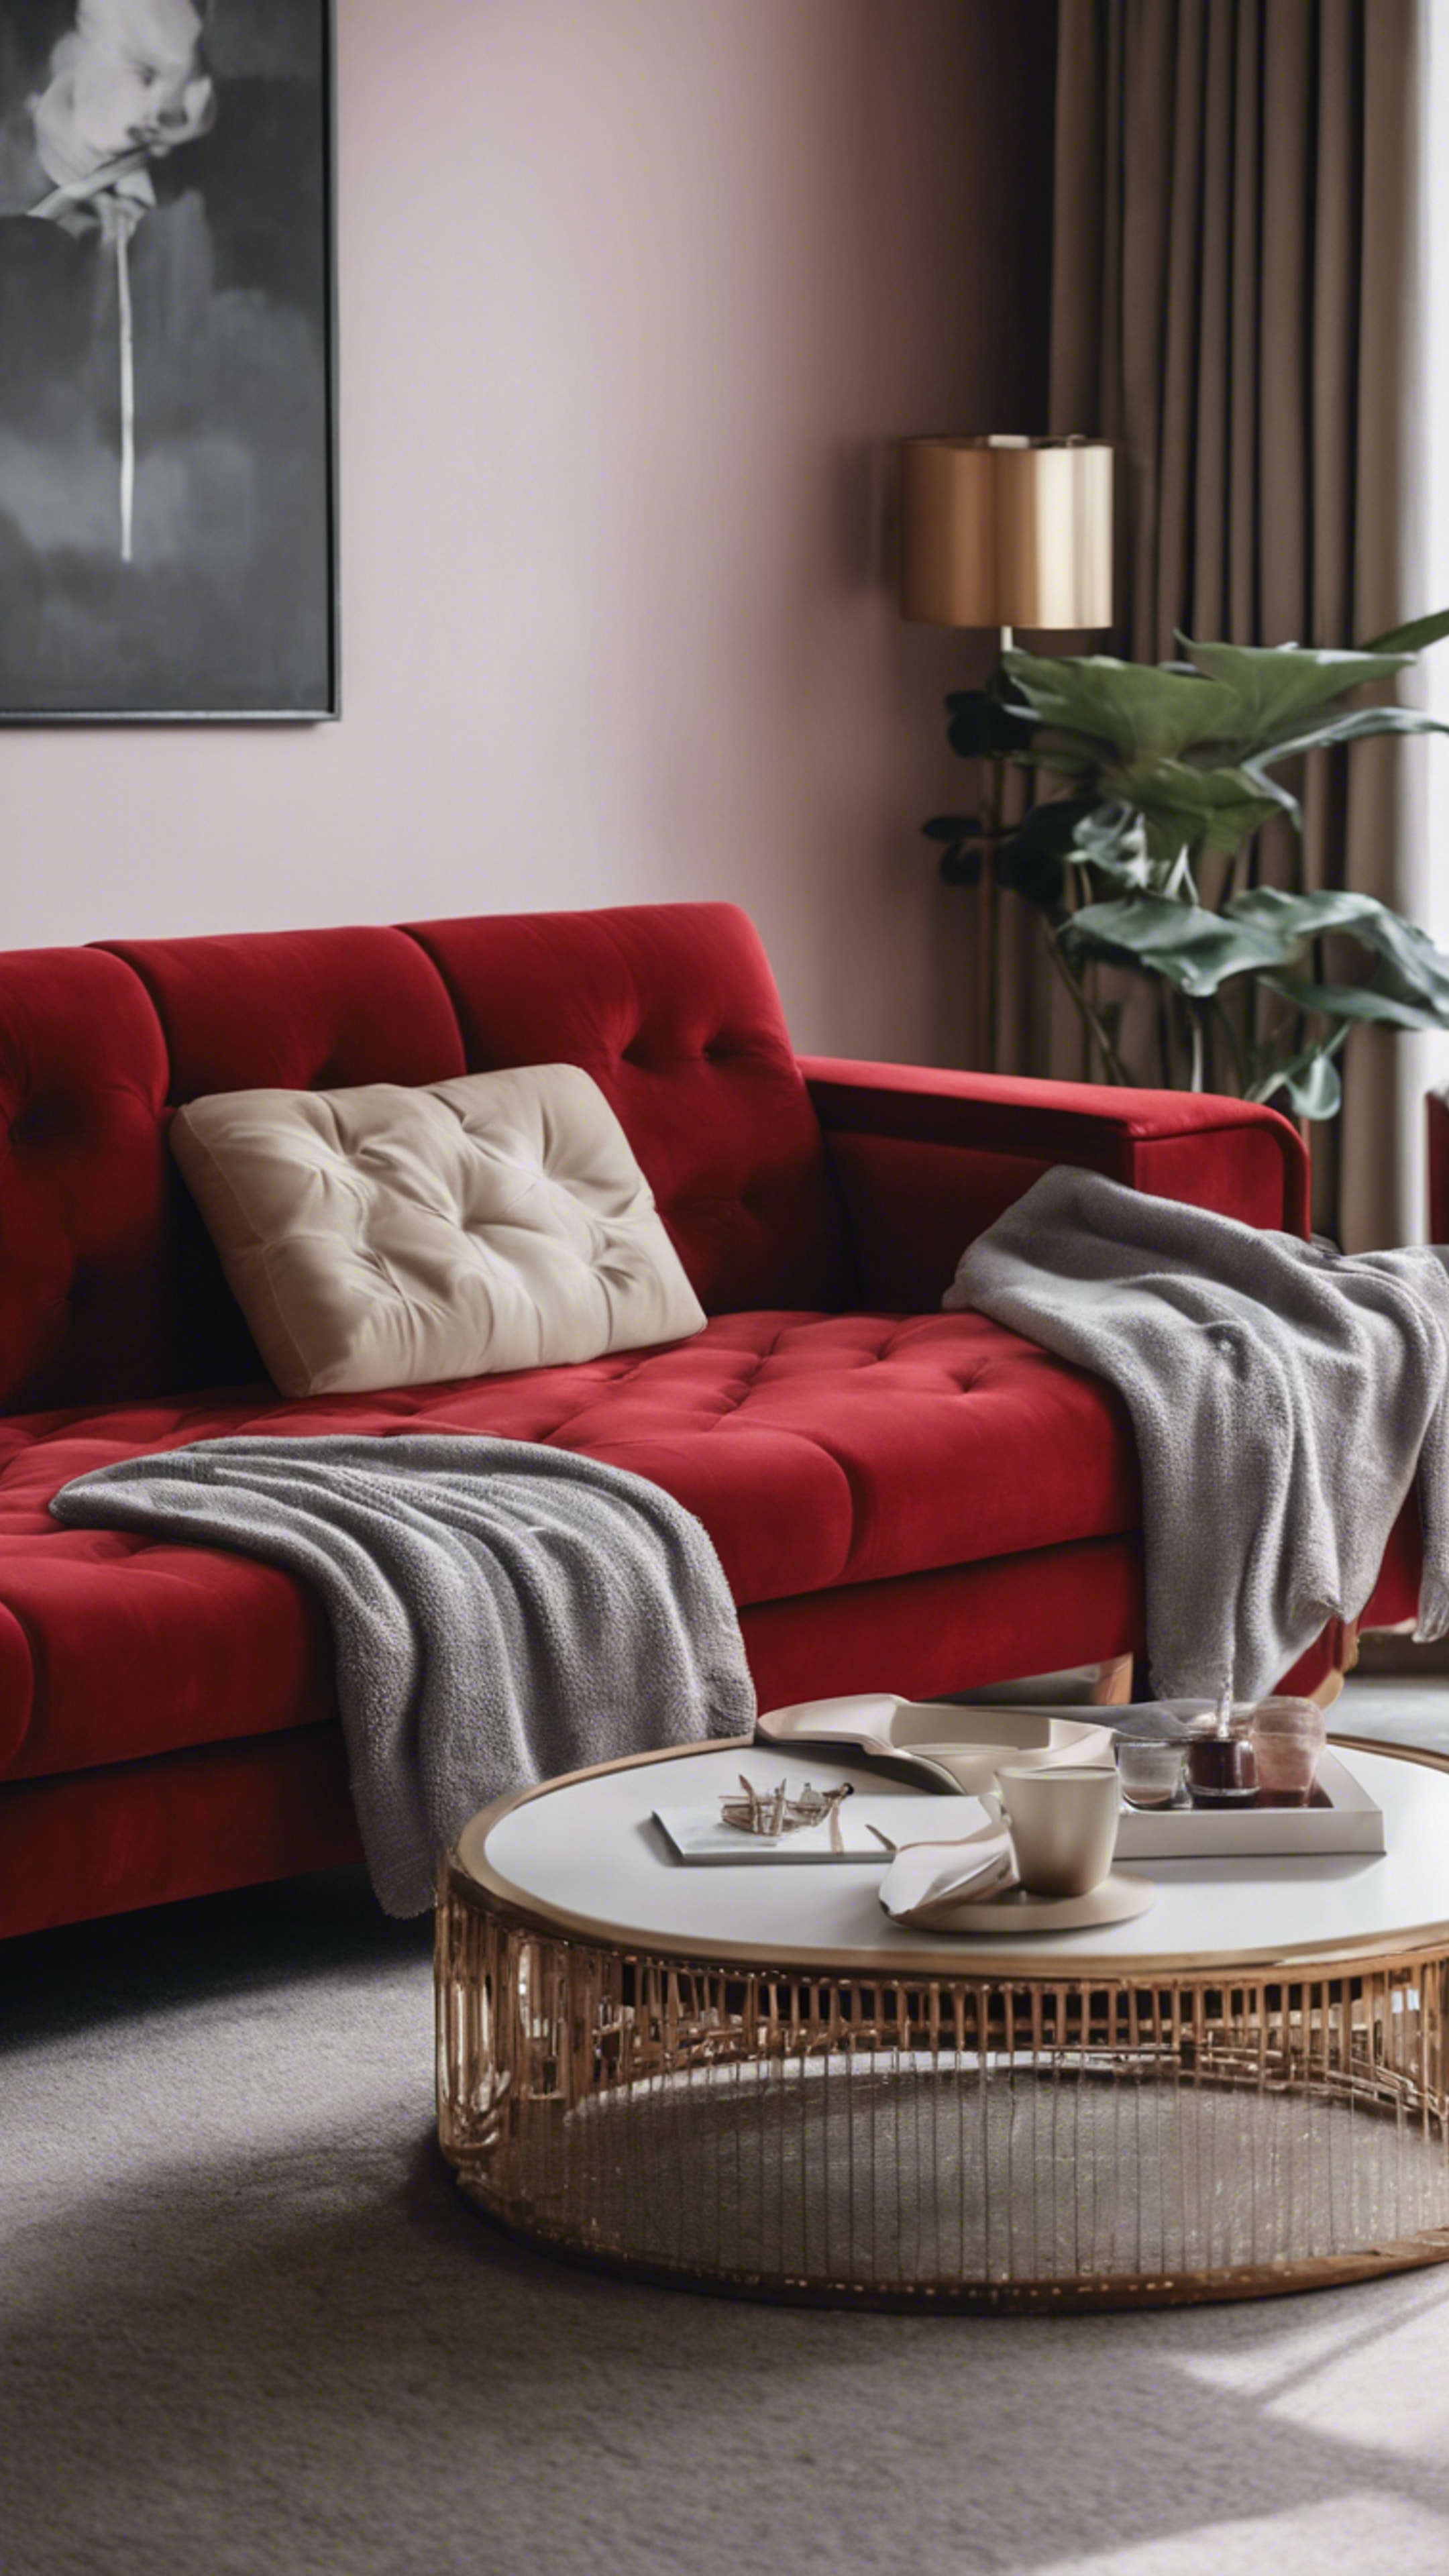 A luxurious red velvet sofa in a minimalistic modern living room, its color standing out in an otherwise neutral scene. Divar kağızı[9f5c54c2b7d04d069b86]